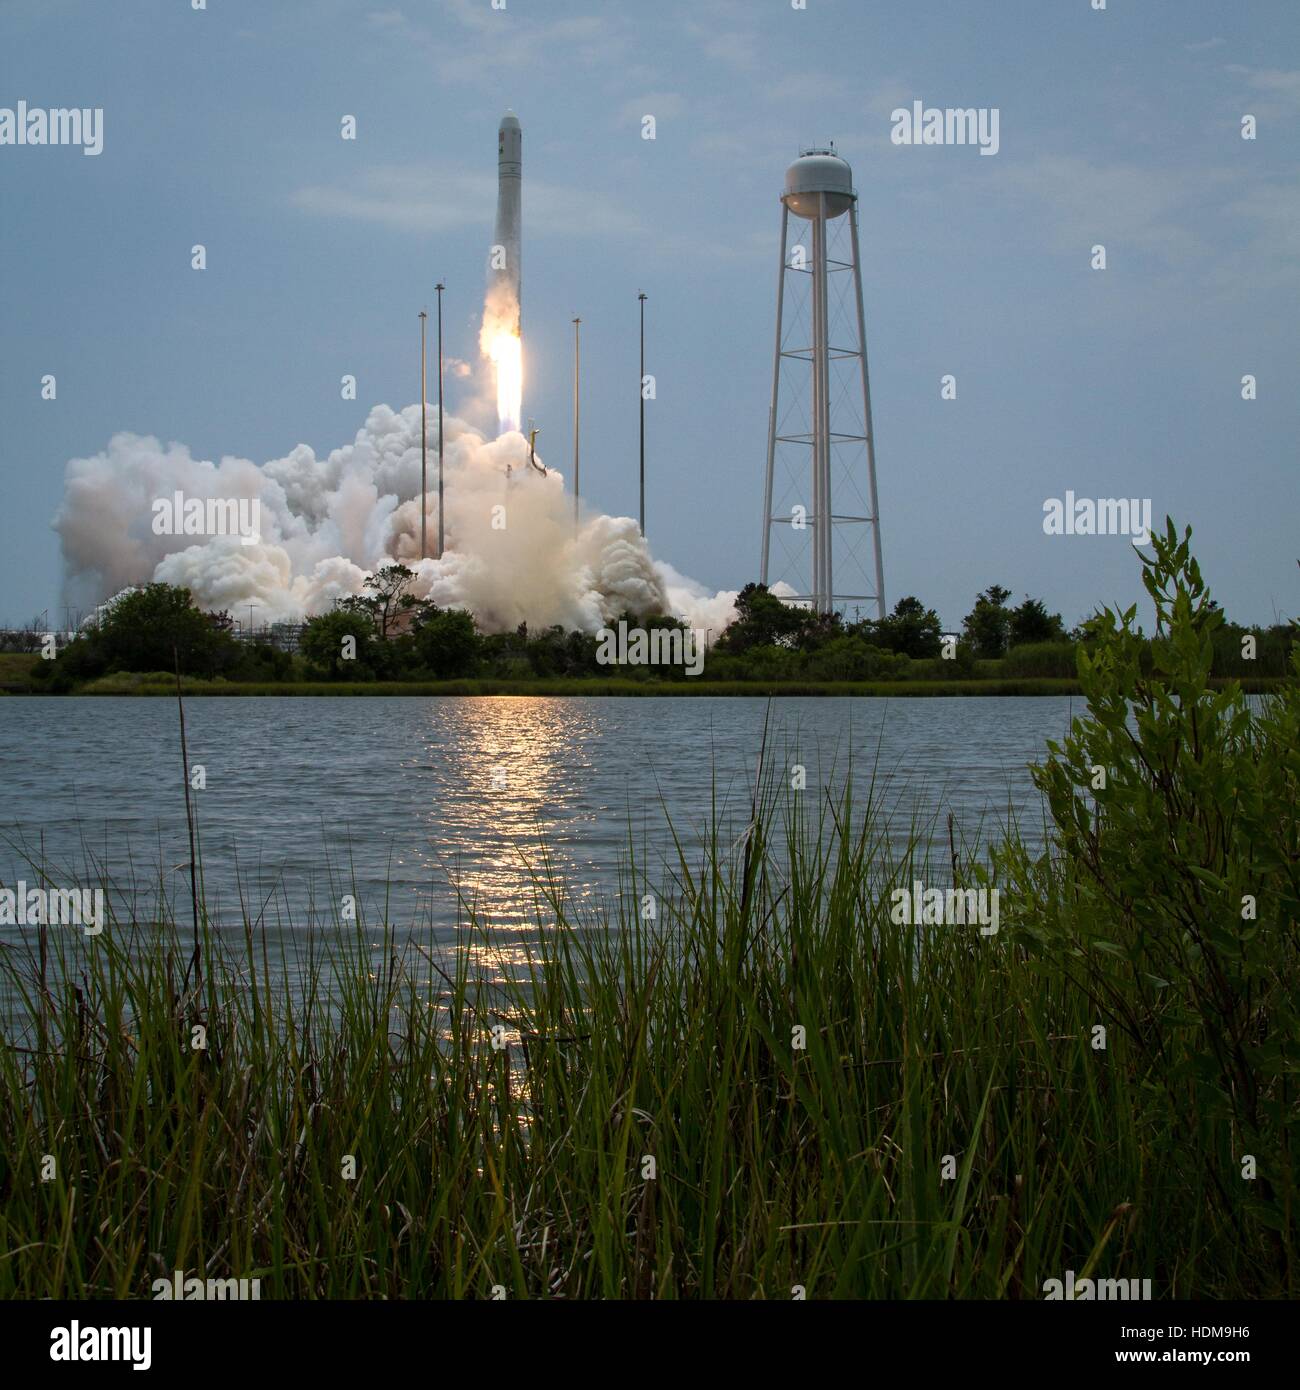 The Orbital Sciences Corporation Antares rocket with Cygnus spacecraft onboard launches from Launch Pad-0A at the NASA Wallops Flight Facility to begin its Orbital-2 cargo delivery flight mission to the International Space Station July 13, 2014 in Chicoteague Island, Virginia. Stock Photo